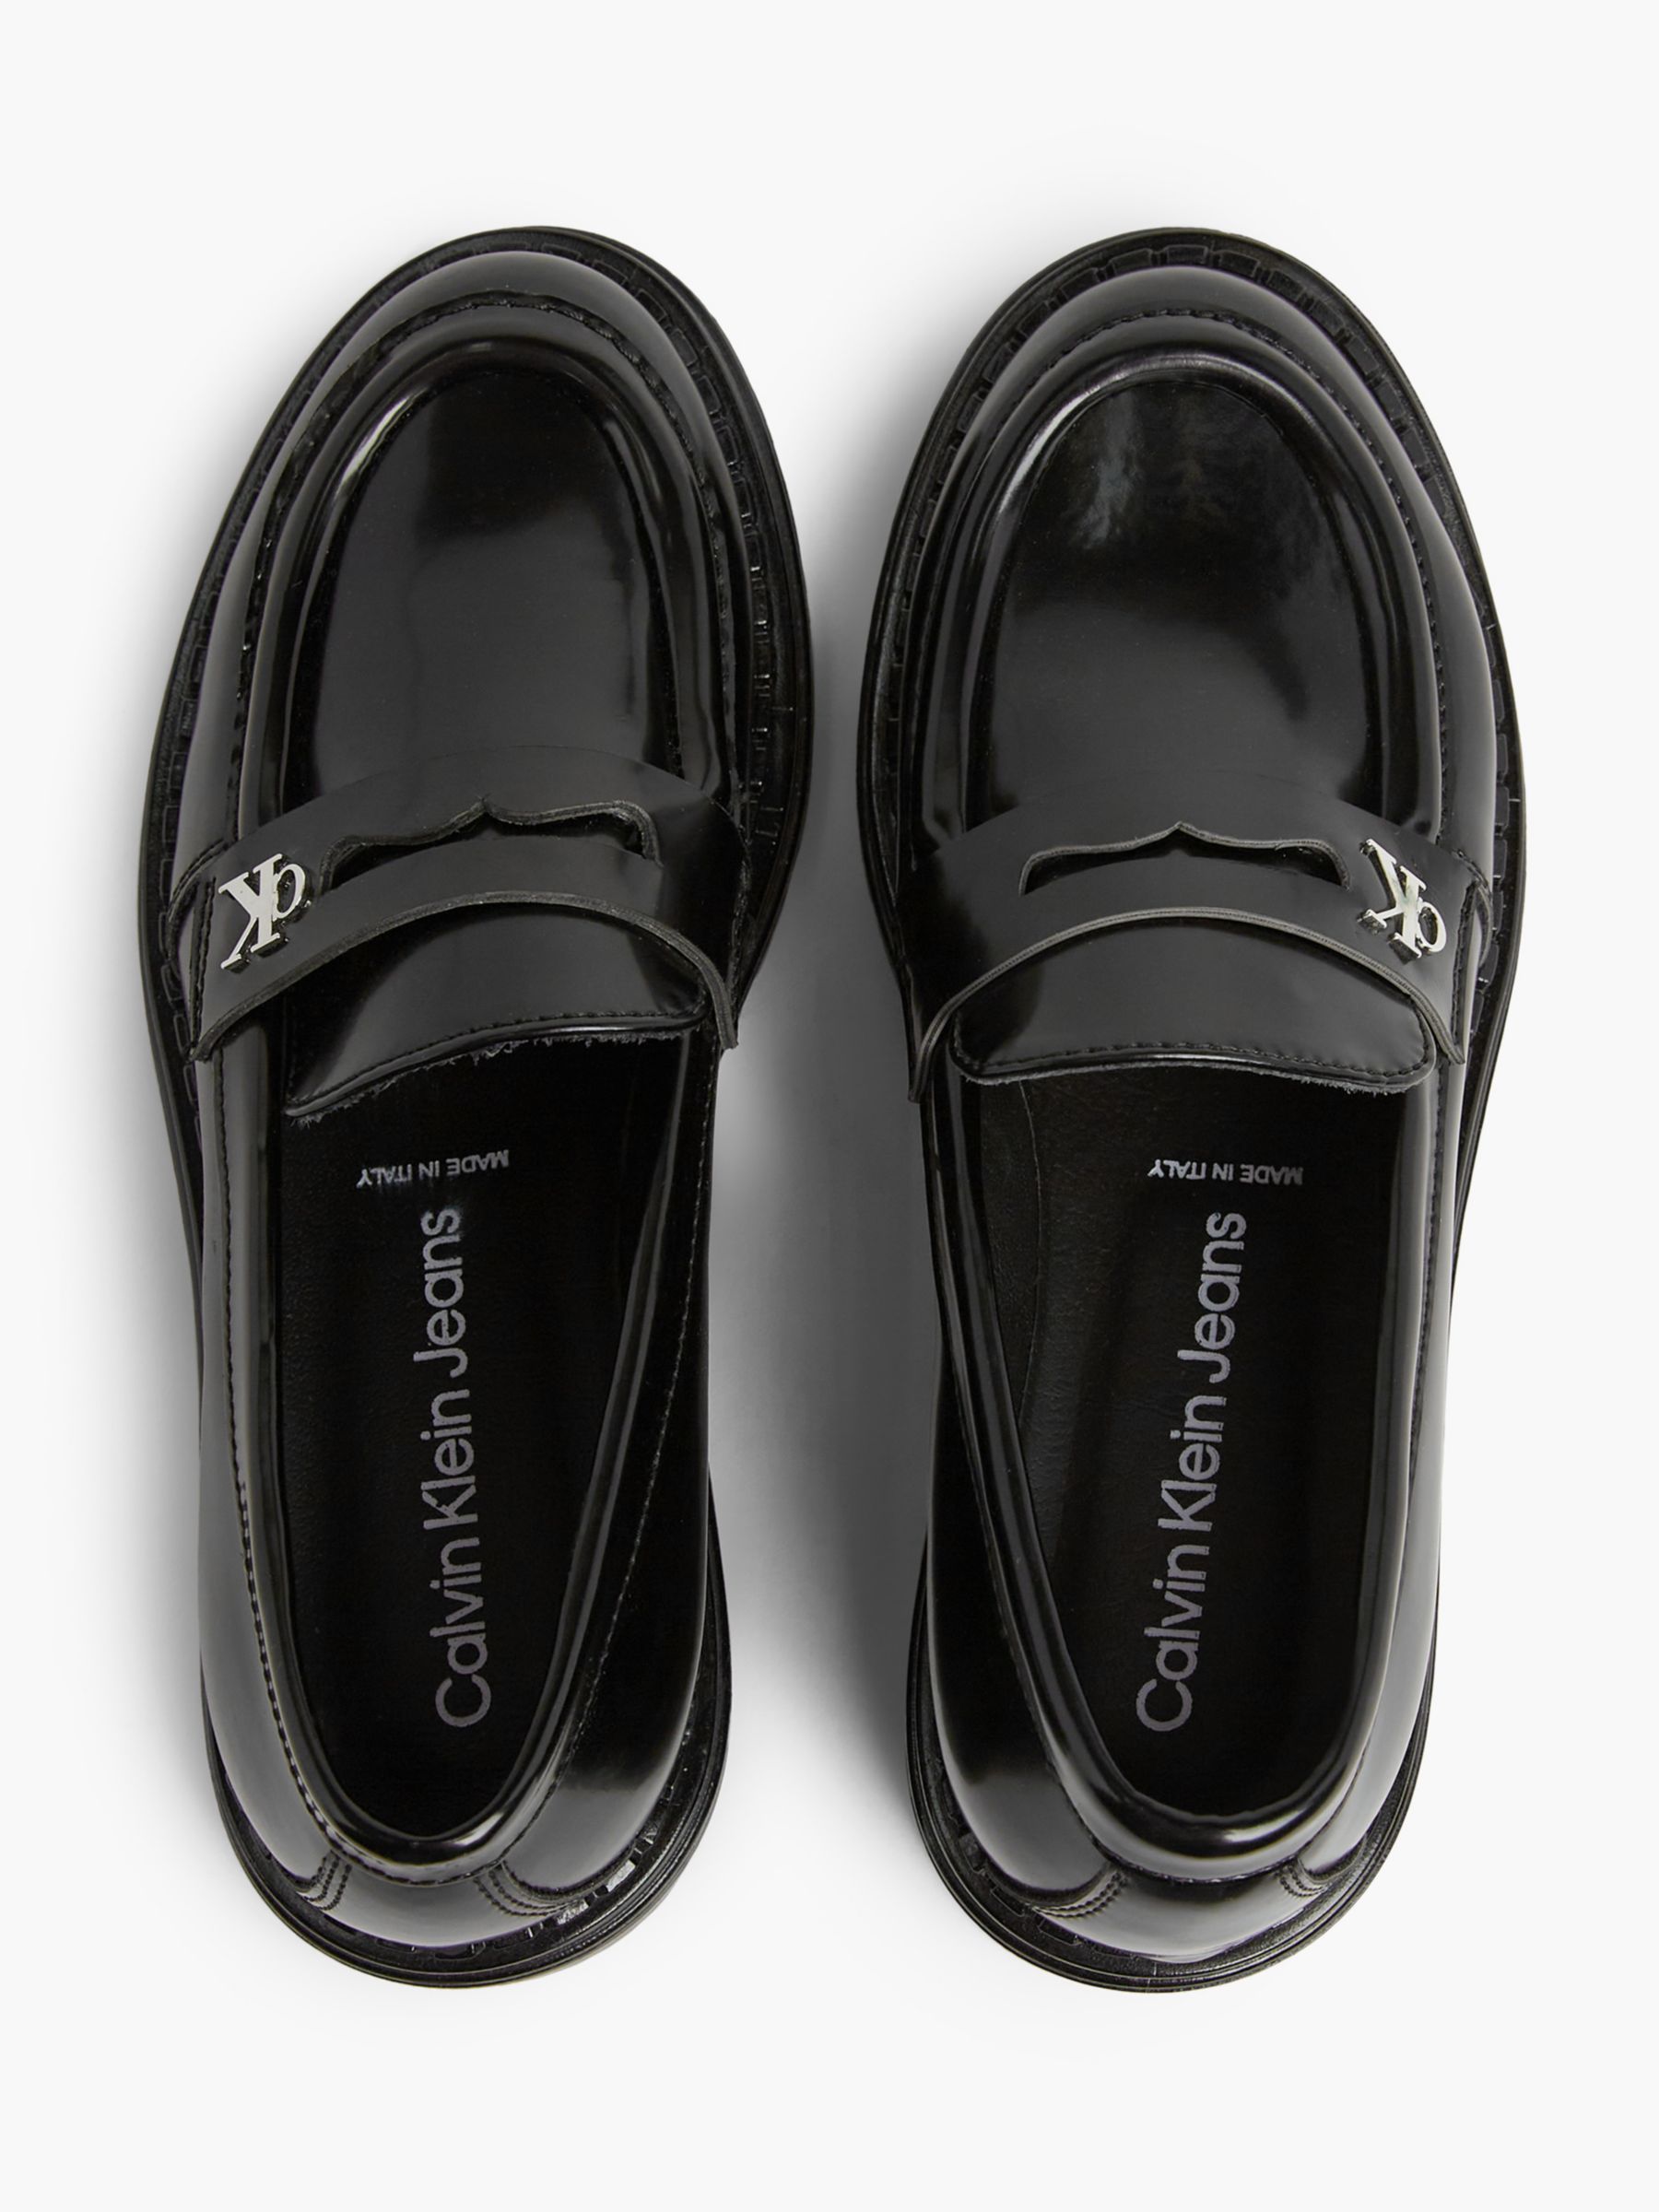 Calvin Klein Kids' Chunky Loafer Shoes, Black, 29